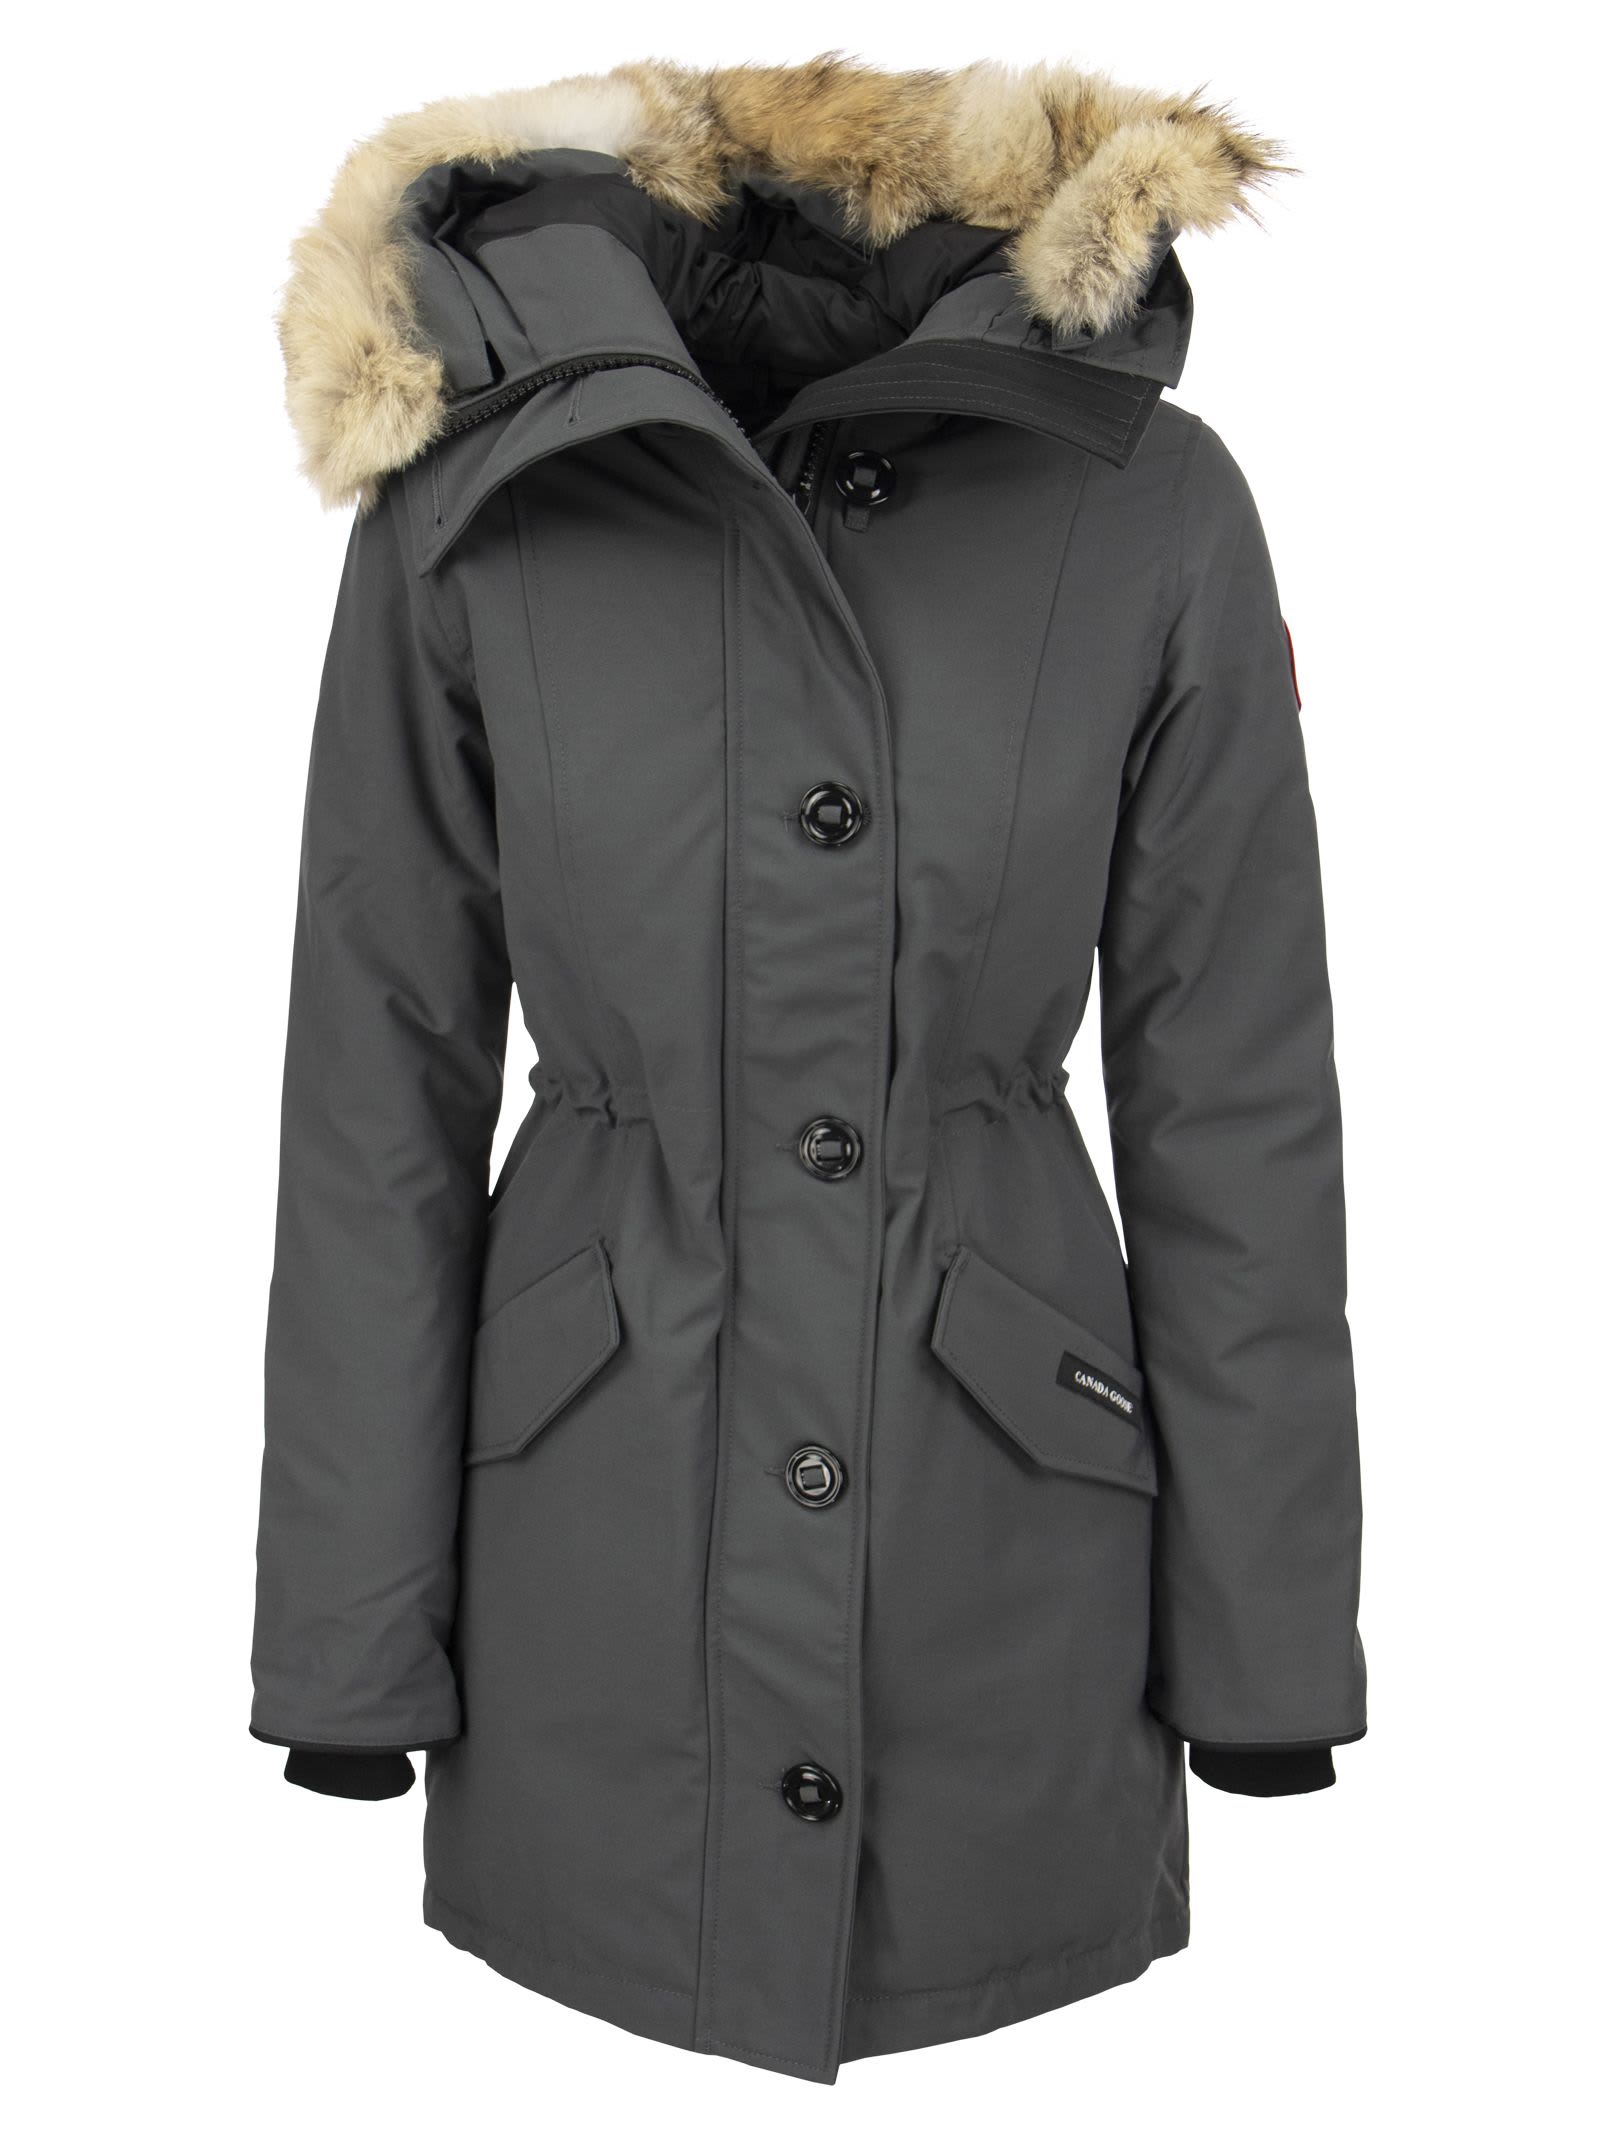 Canada Goose Rossclair - Parka With Hood And Fur Coat